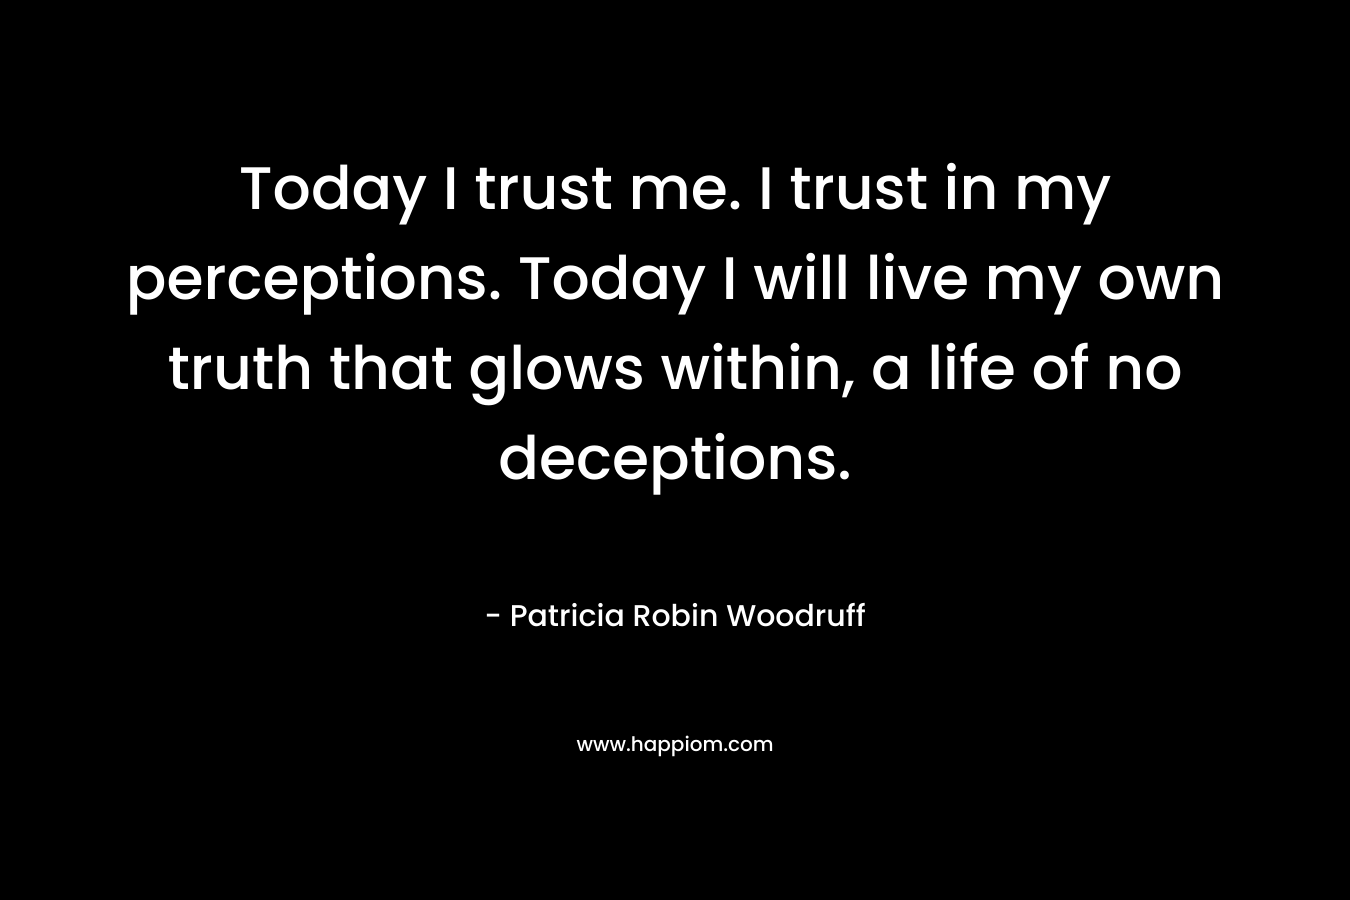 Today I trust me. I trust in my perceptions. Today I will live my own truth that glows within, a life of no deceptions.